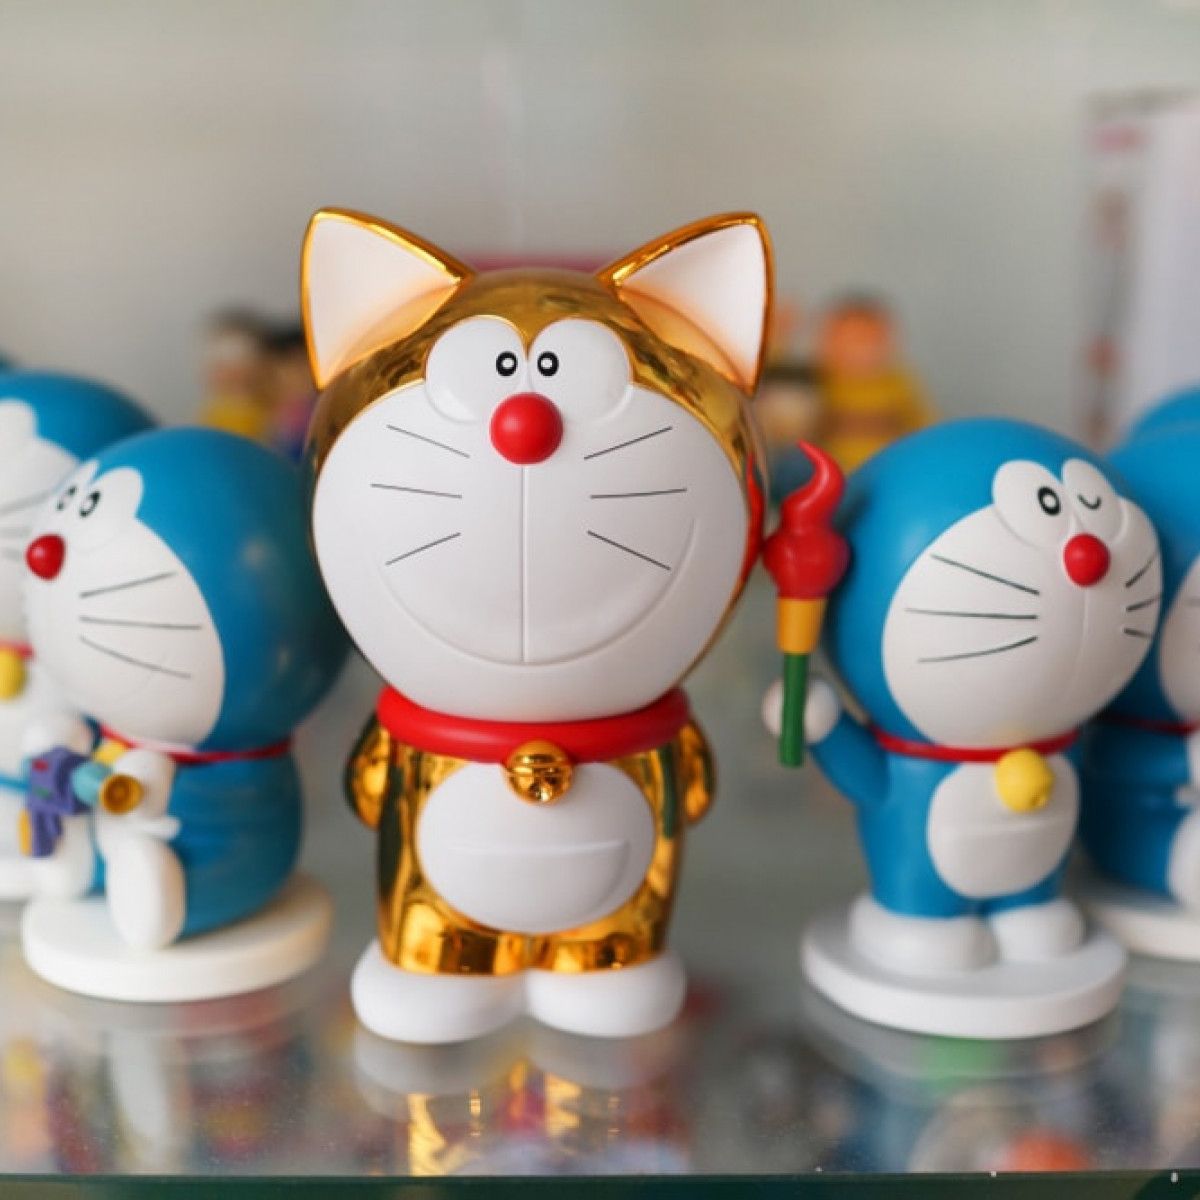 Japan's Soft Power Leader in China is a Fat Blue Cartoon Cat | ChinaFile